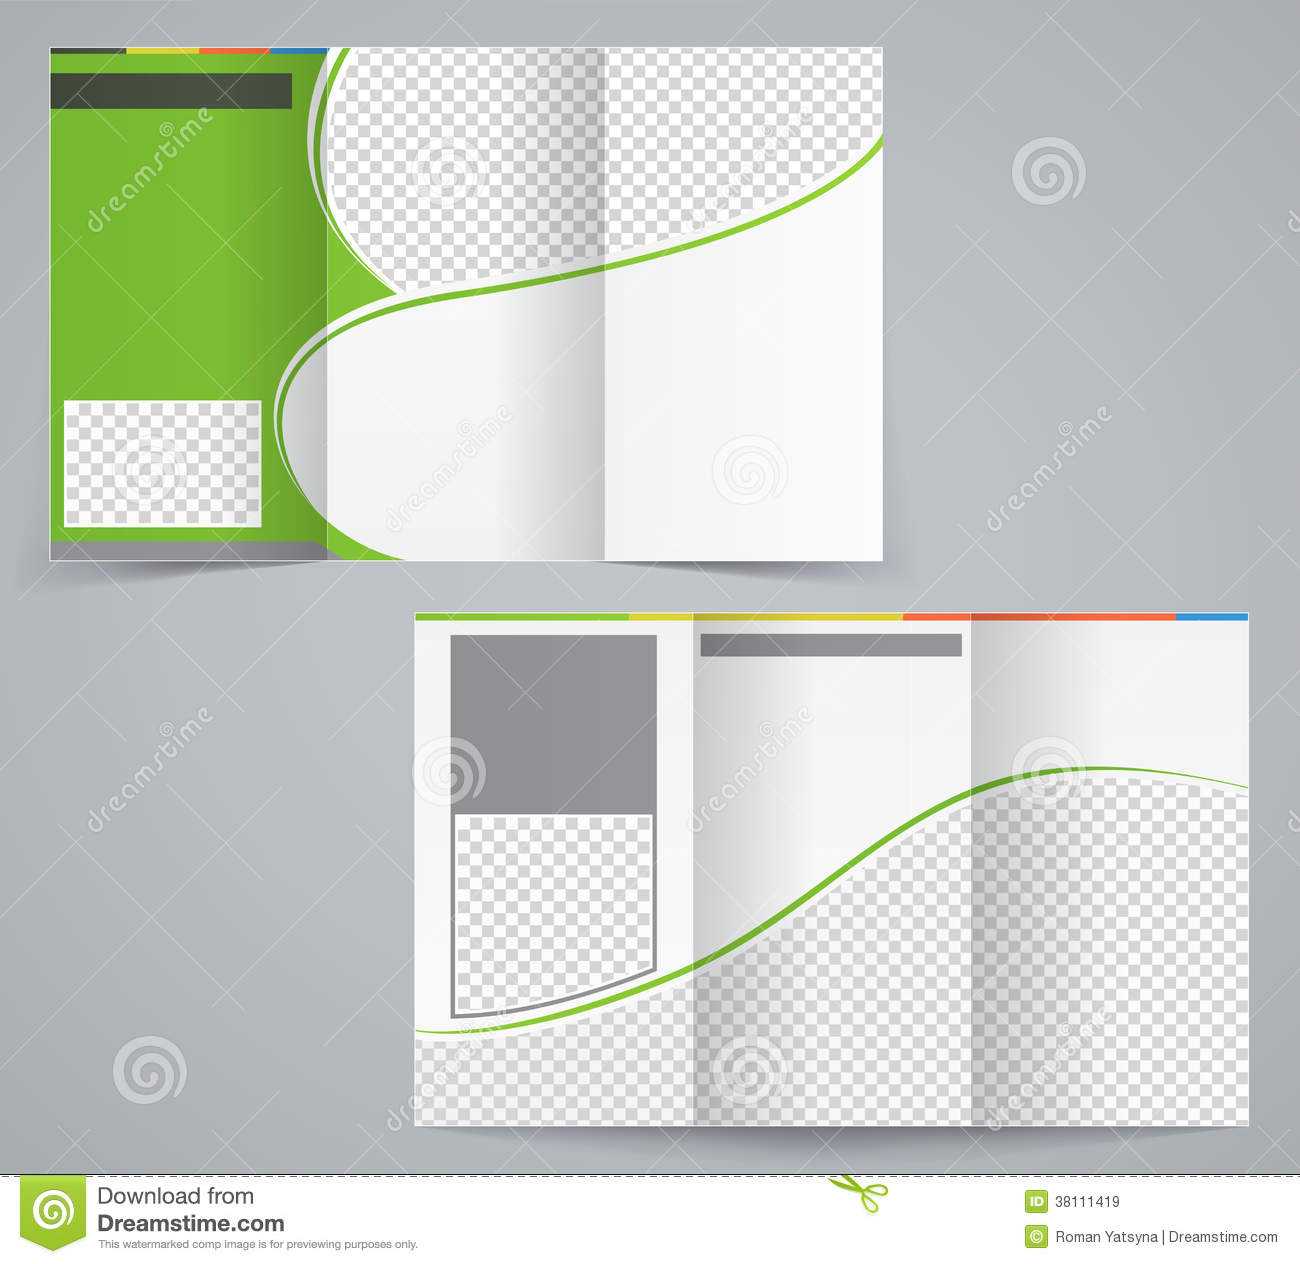 Tri Fold Business Brochure Template, Vector Green Stock Intended For Brochure Template Illustrator Free Download